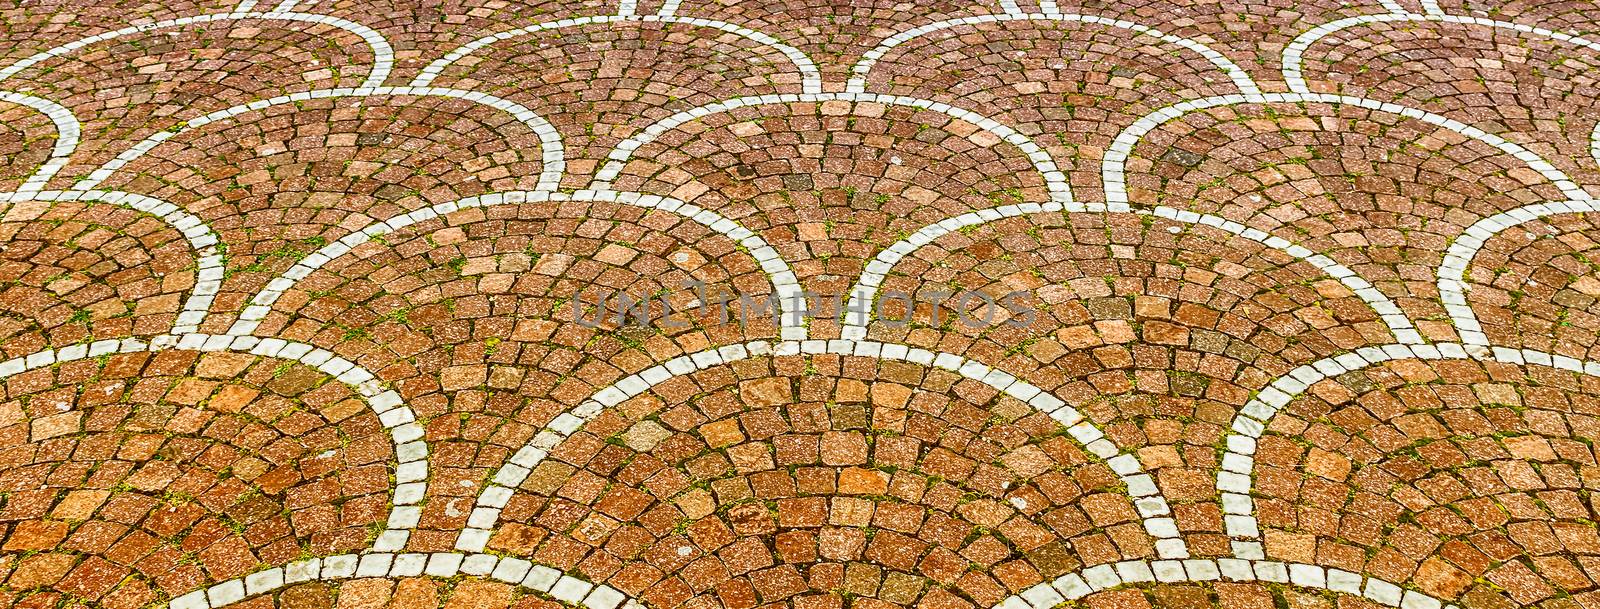 Sampietrini pavement in Rome, Italy. May be used as background